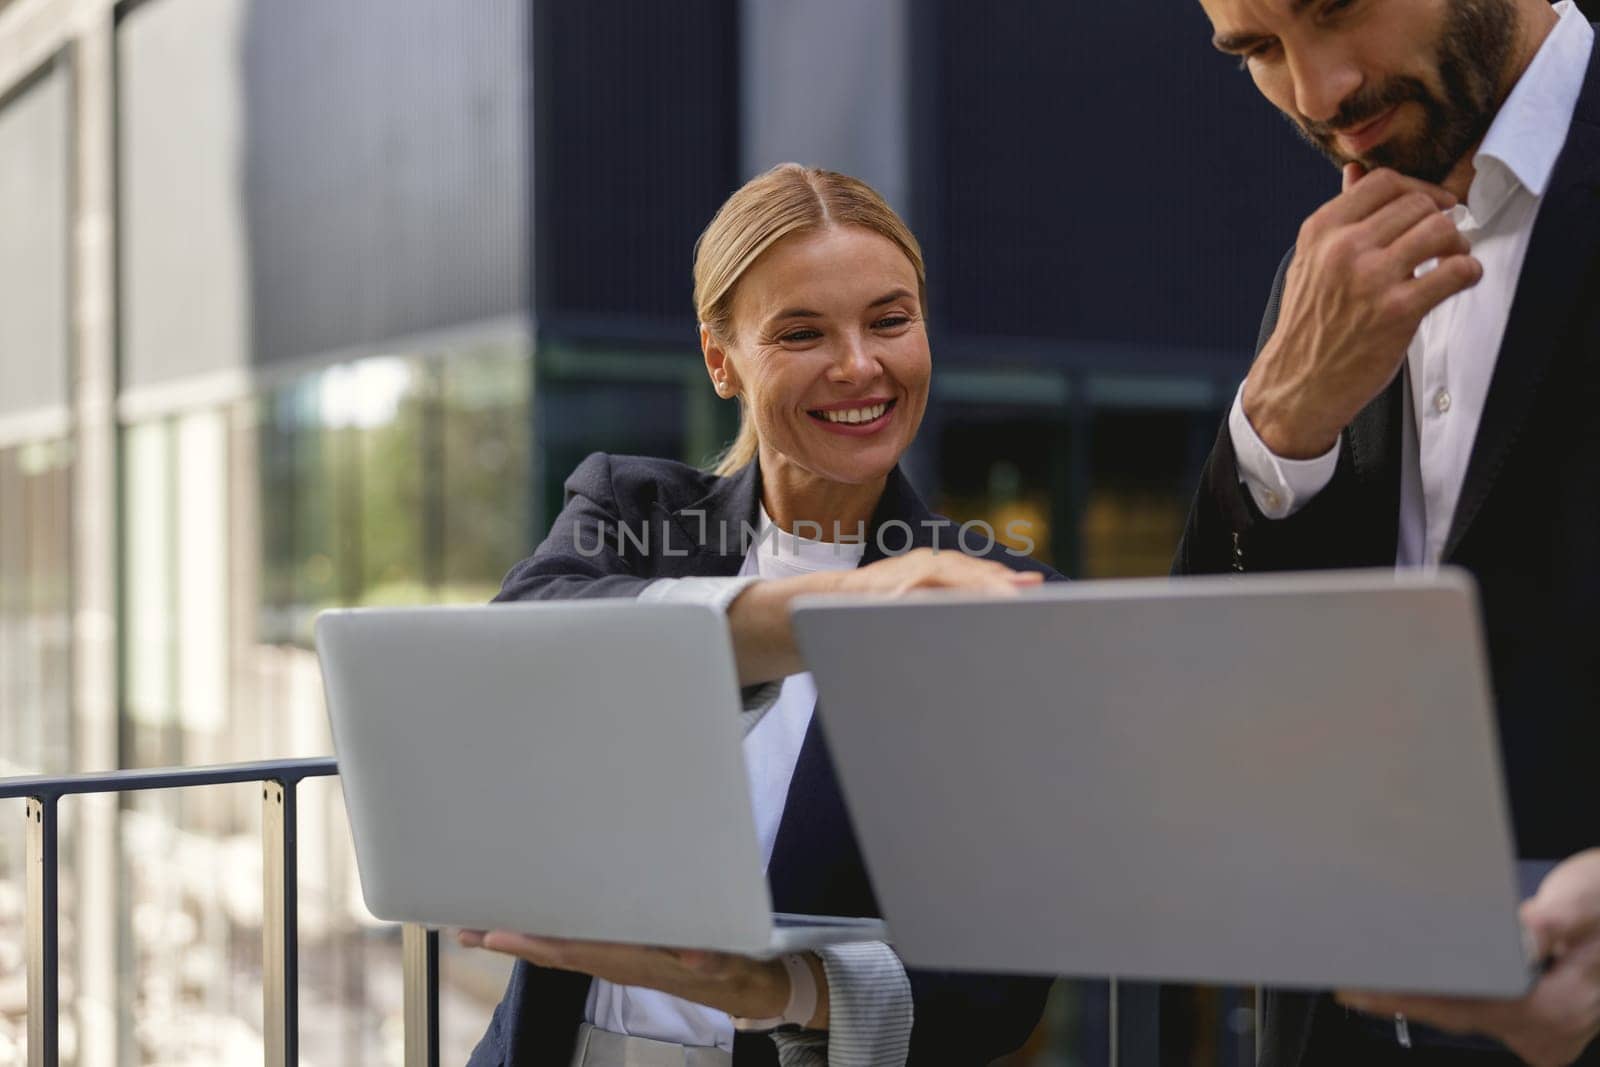 Two business people discuss biz issue while use laptop standing on modern office terrace